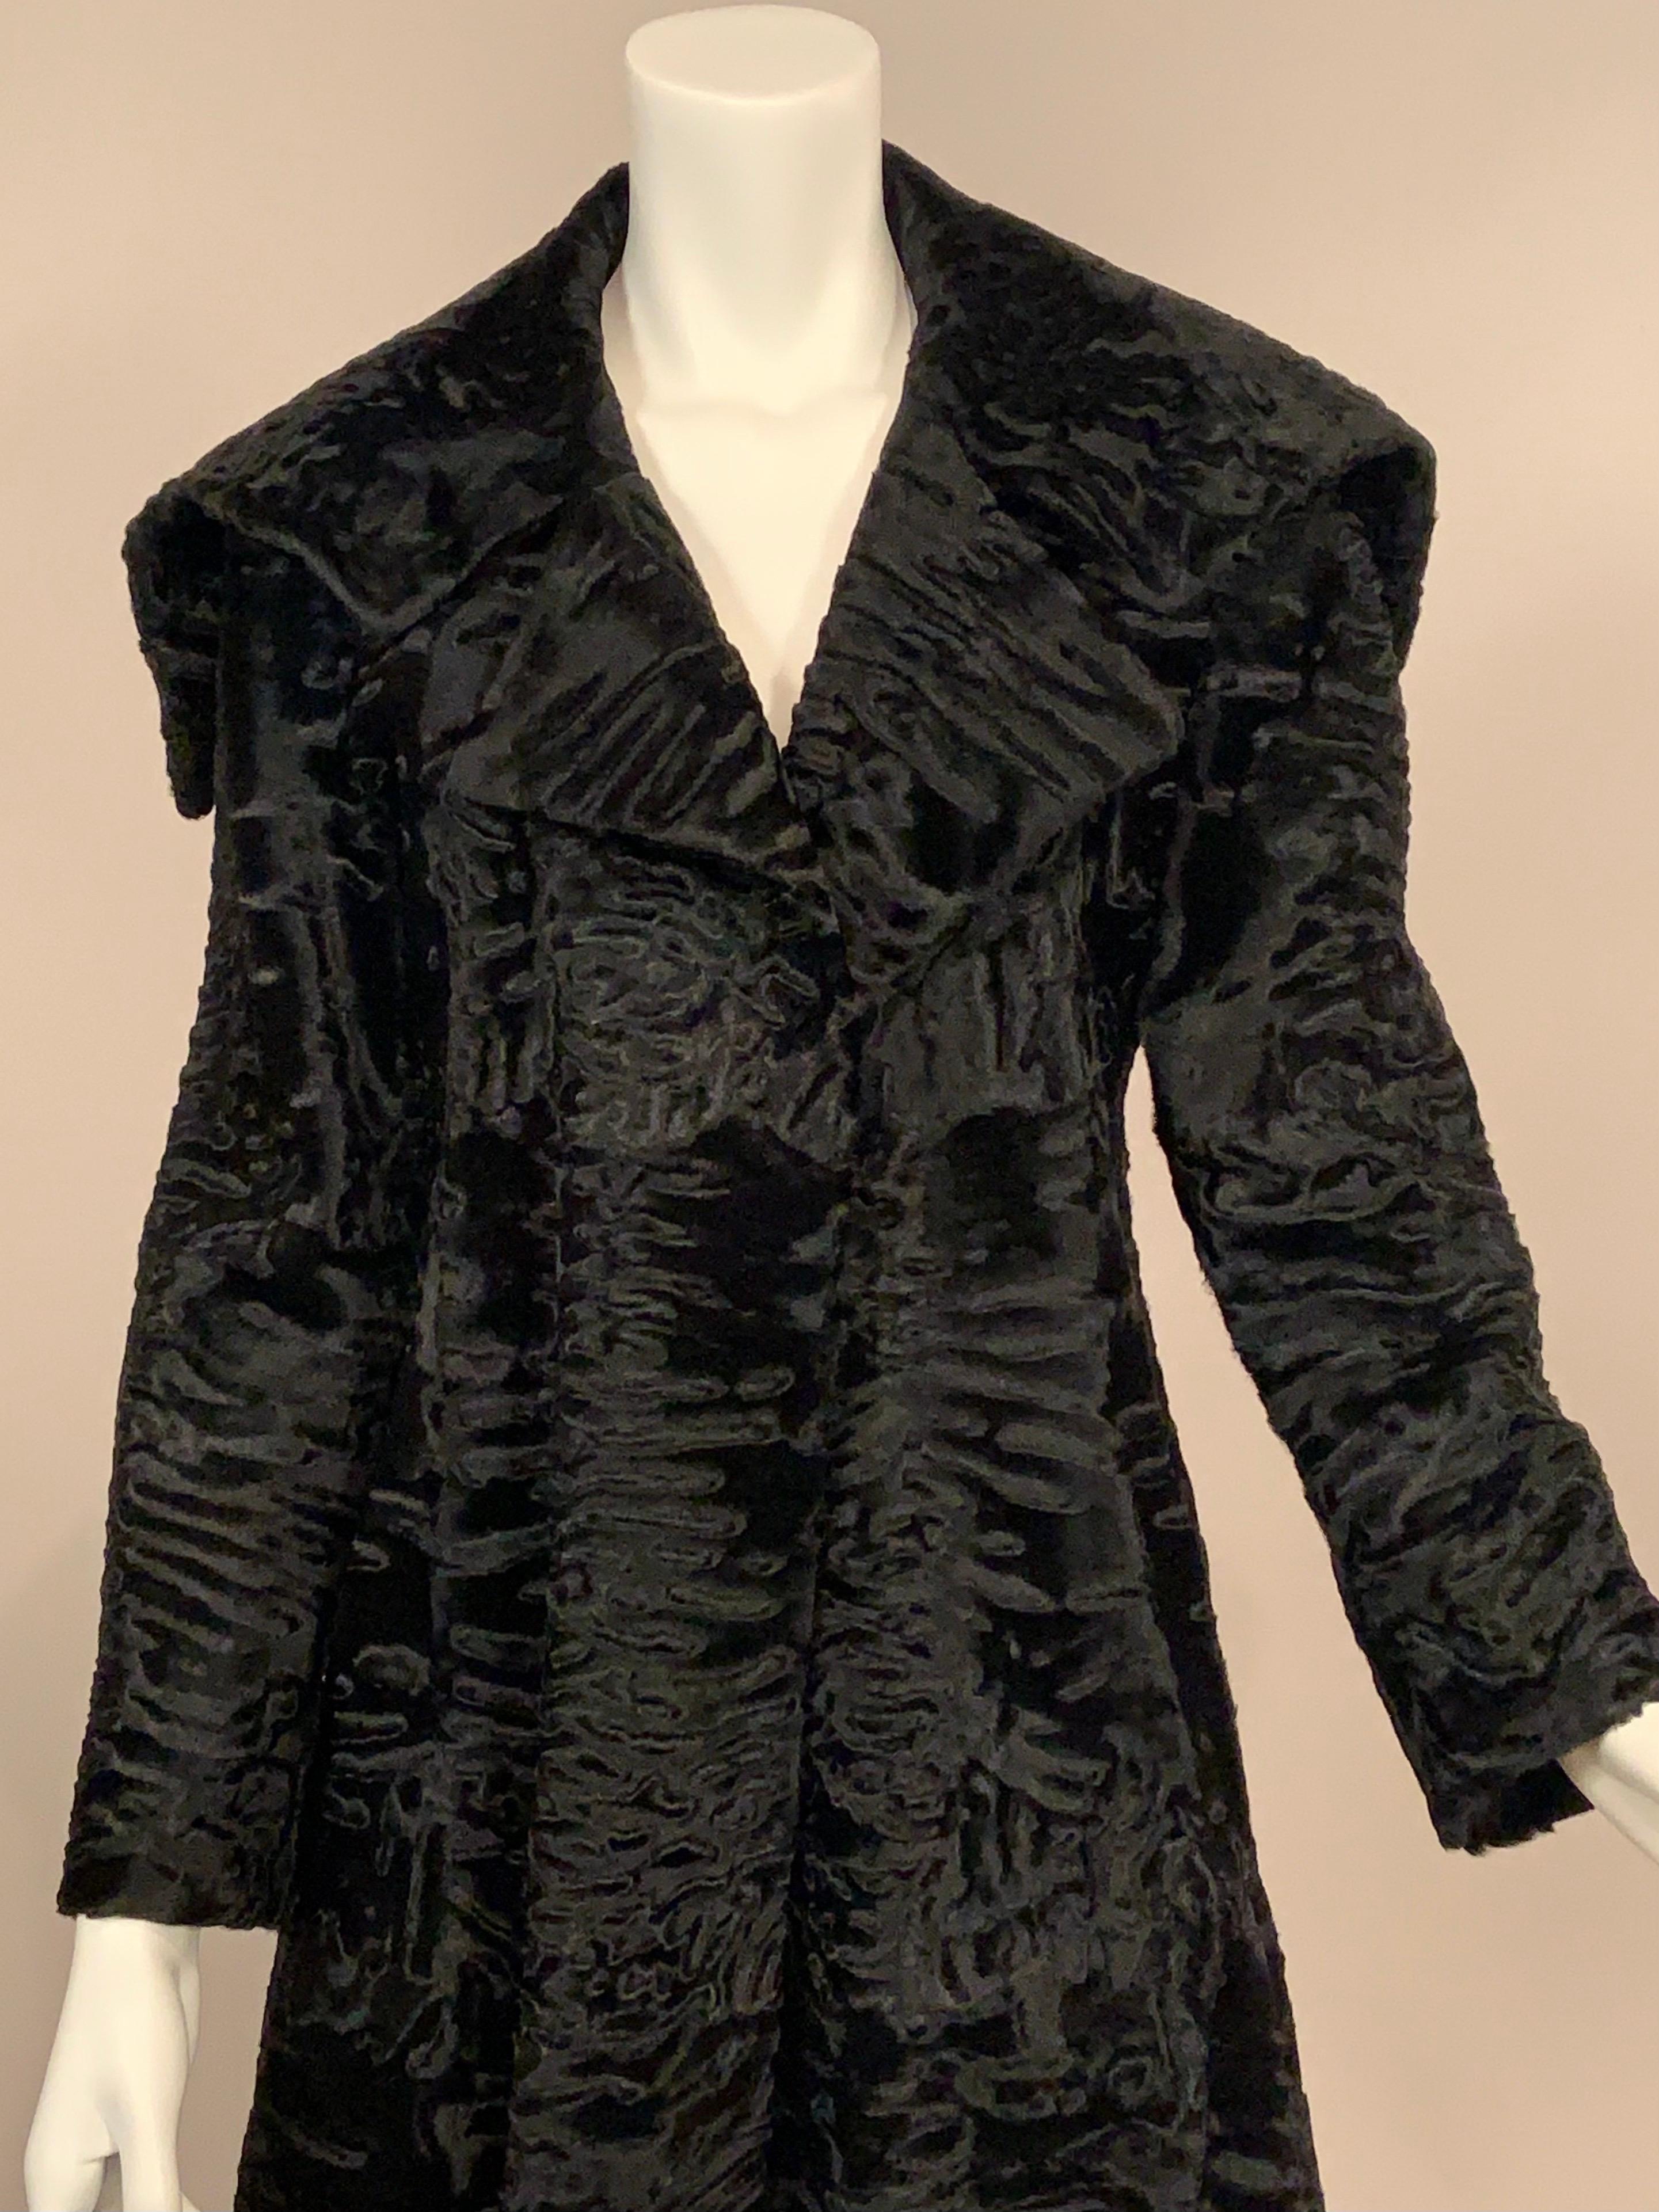 This beautiful, brand new black Swakara coat from J. Mendel, Paris has an original price tag of $23,500.00.   It feels like velvet but it will keep you much warmer.  The coat has an oversized collar which can be worn up or down for two distinctly